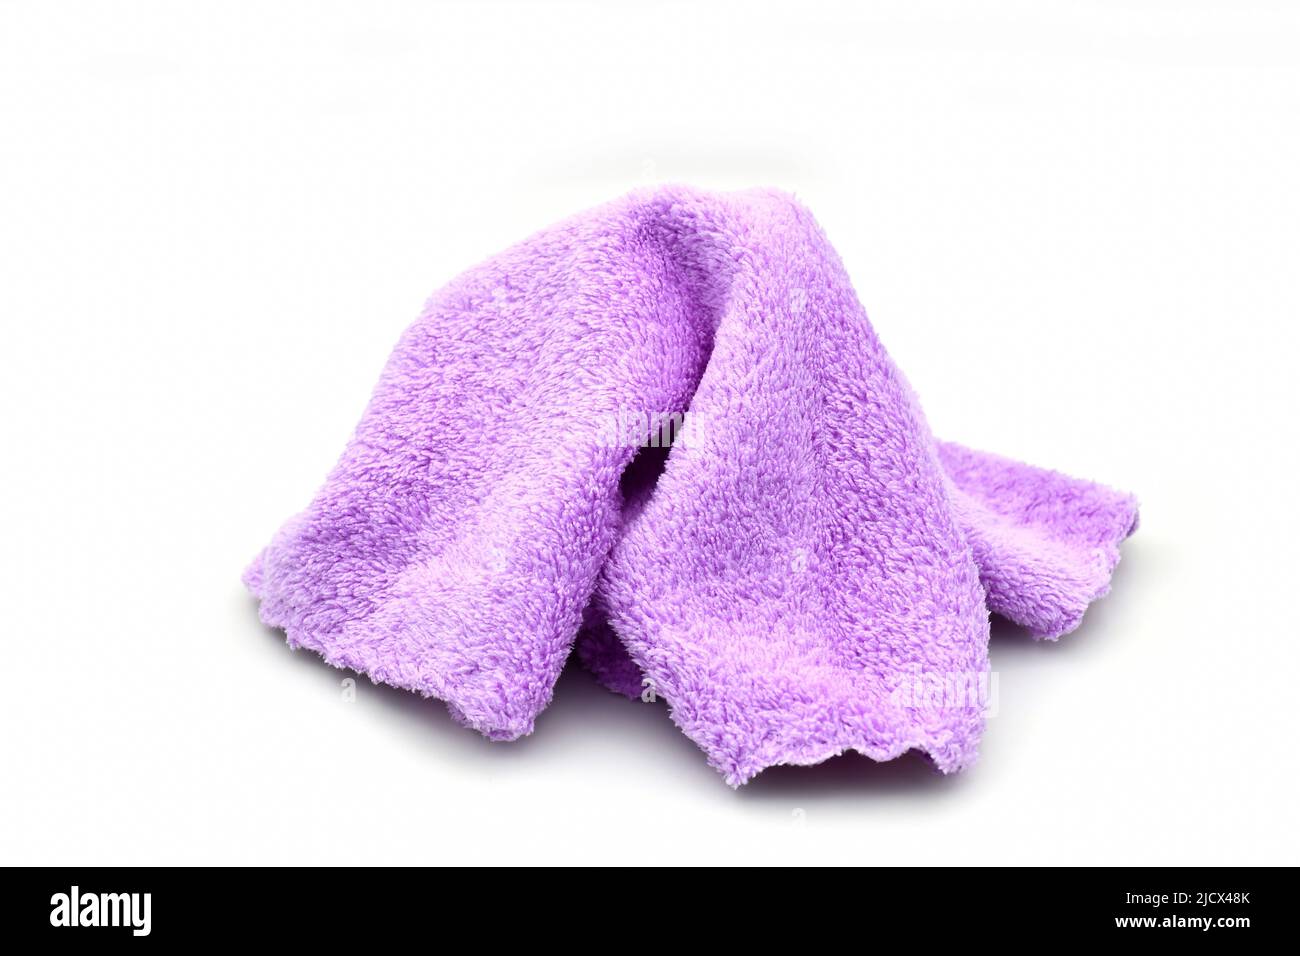 Tiny soft cleaning cloth on white background. Stock Photo